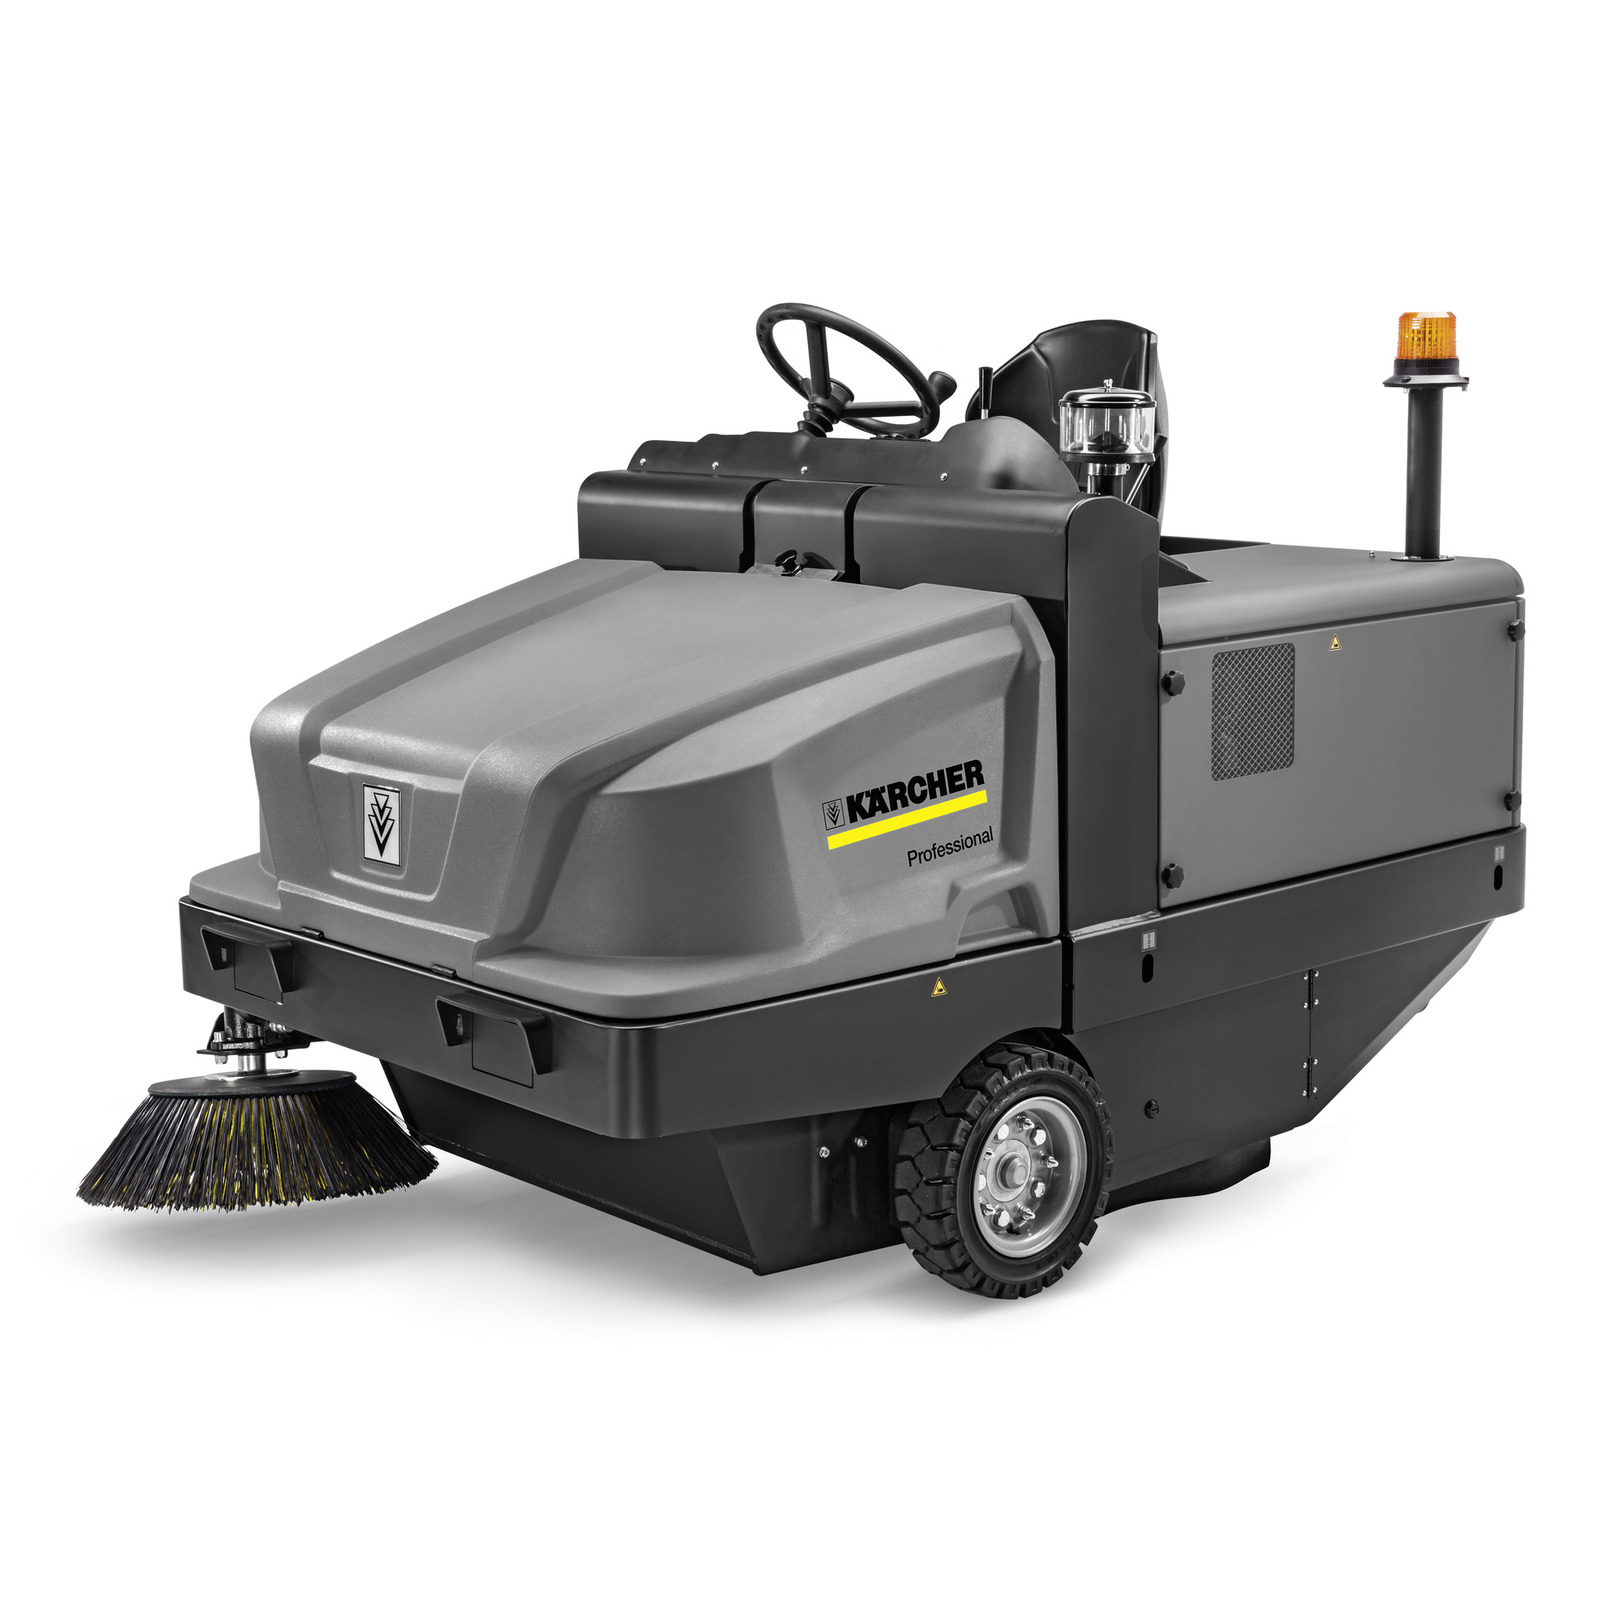 Other cleaning machines